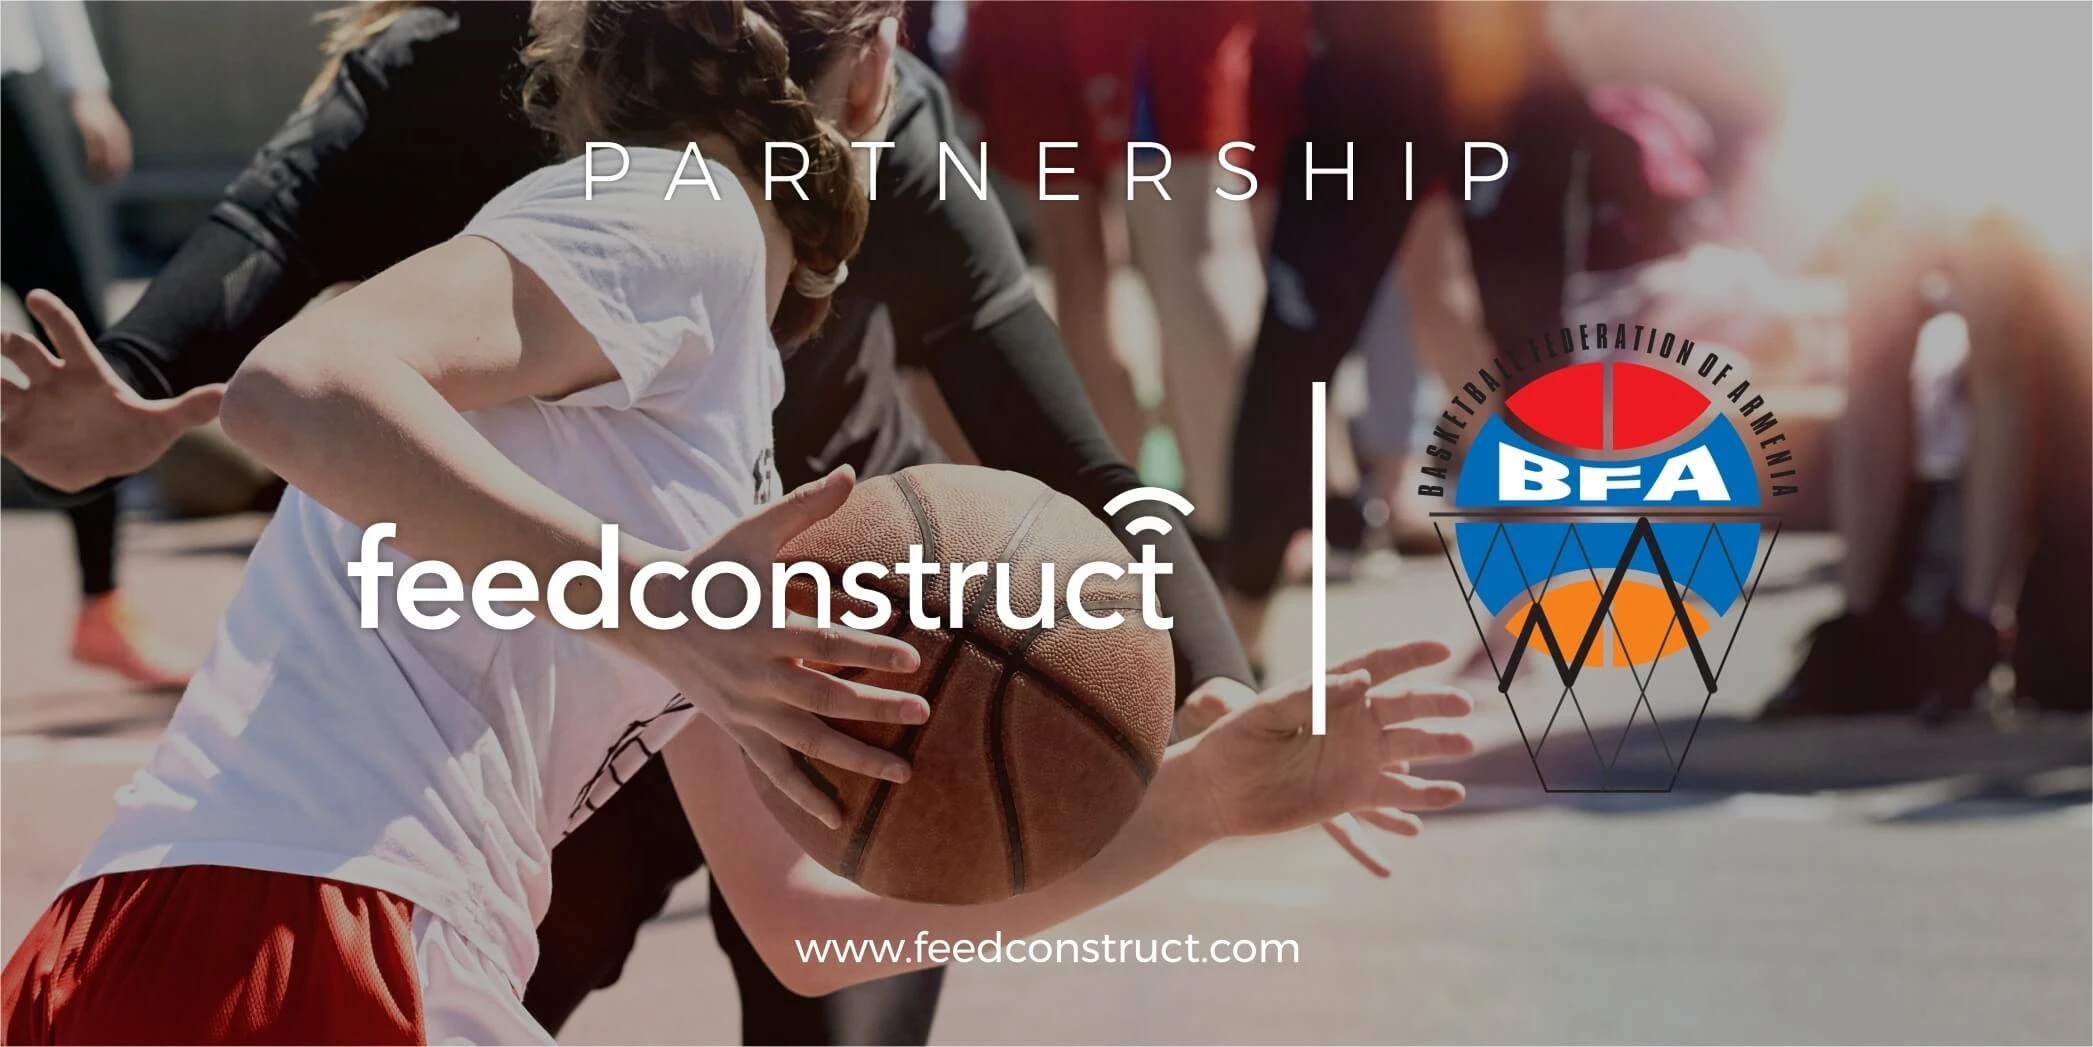 FeedConstruct signs an exclusive deal with Basketball Federation of Armenia